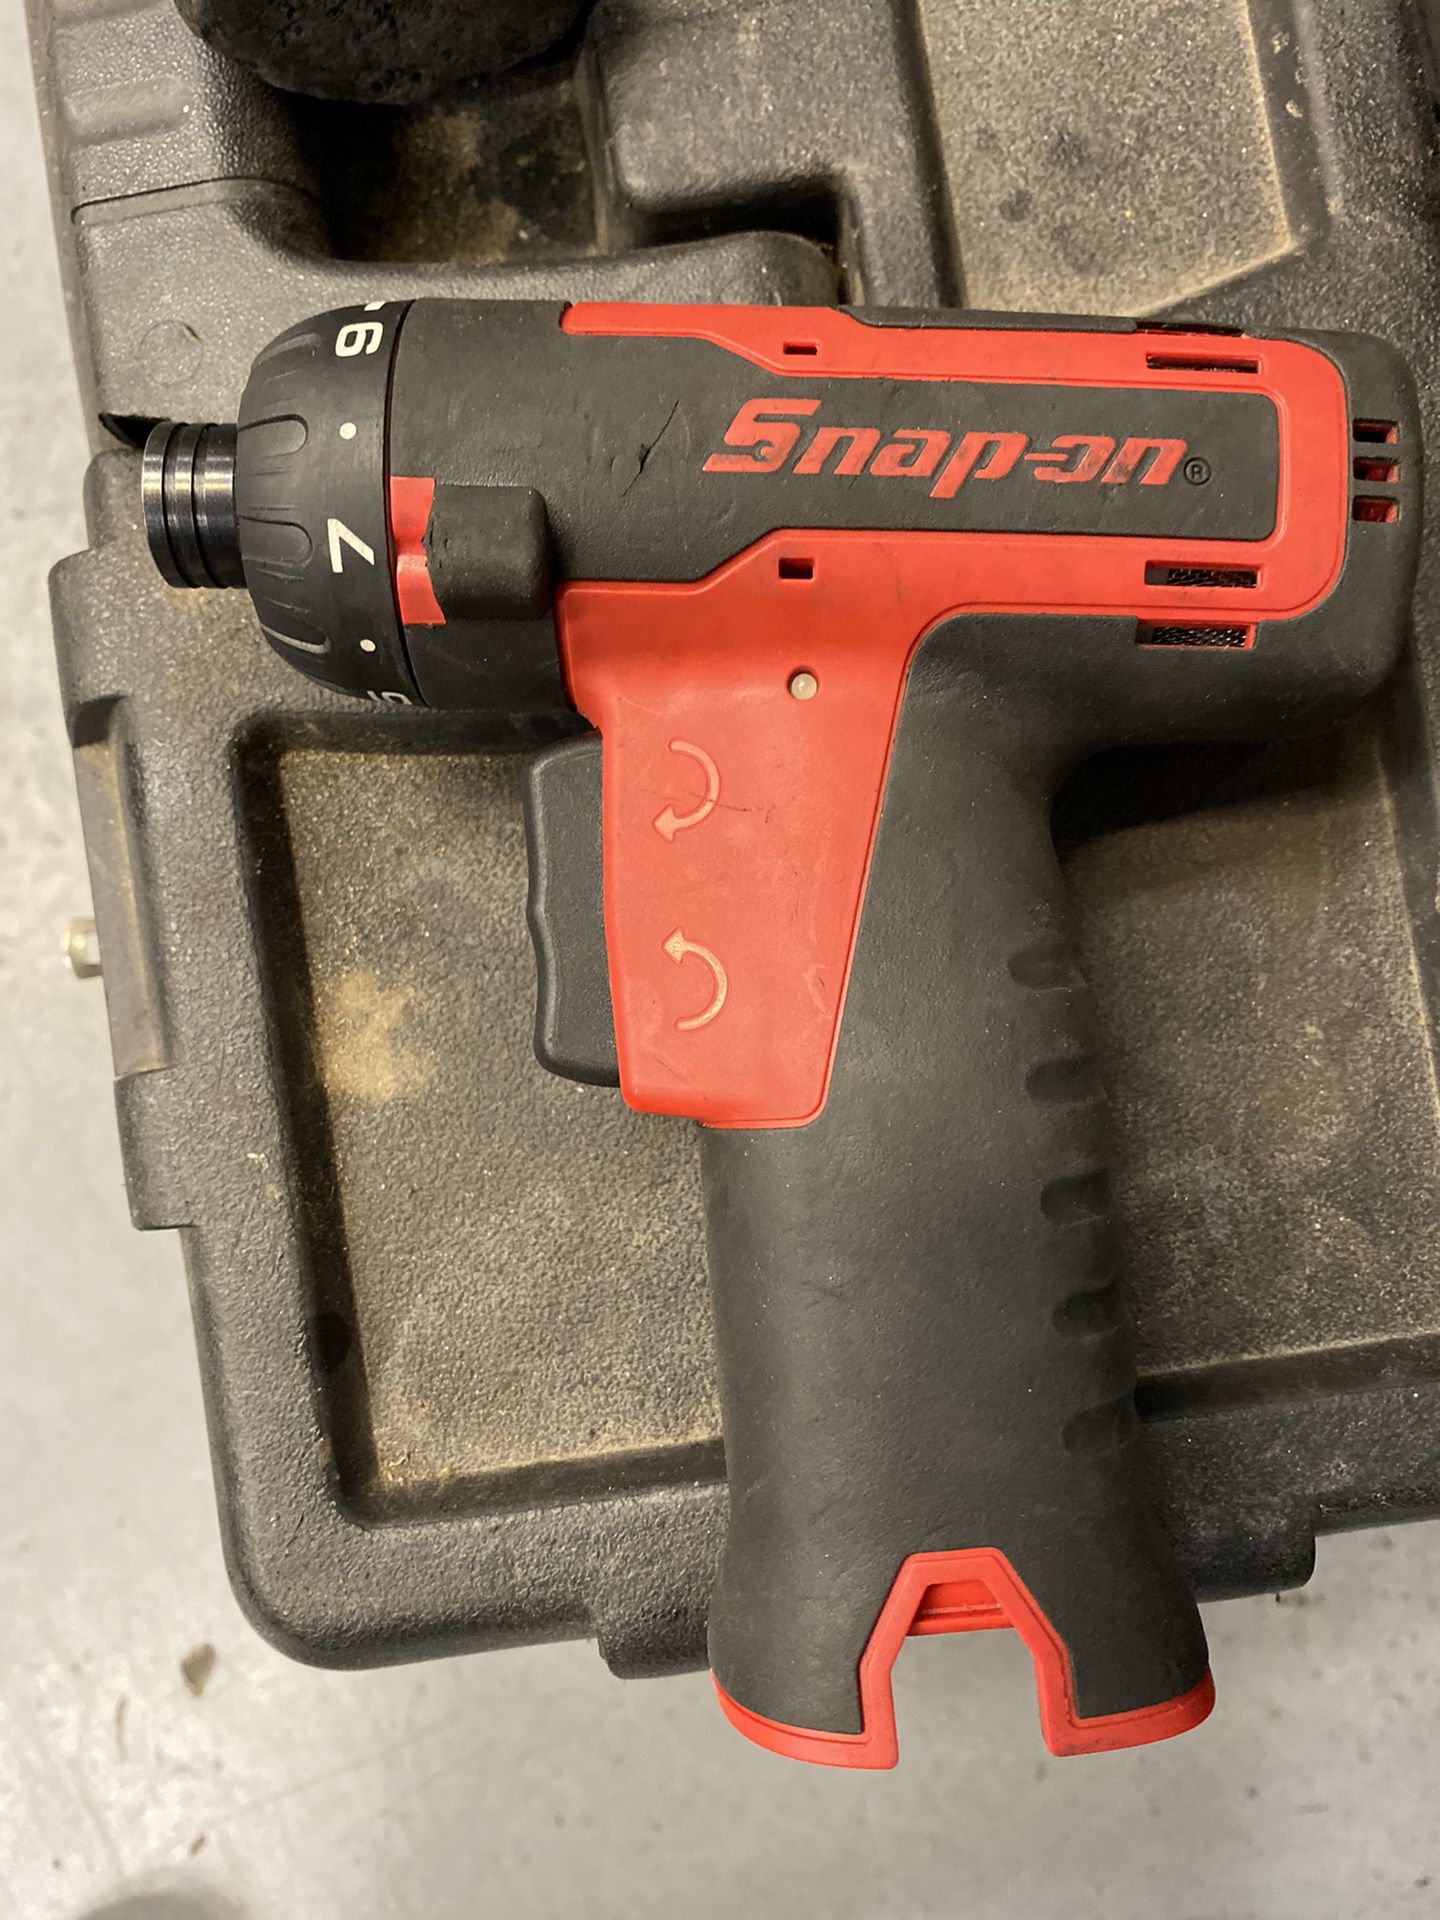 Snap on 1/4 bit drill (bare tool only)